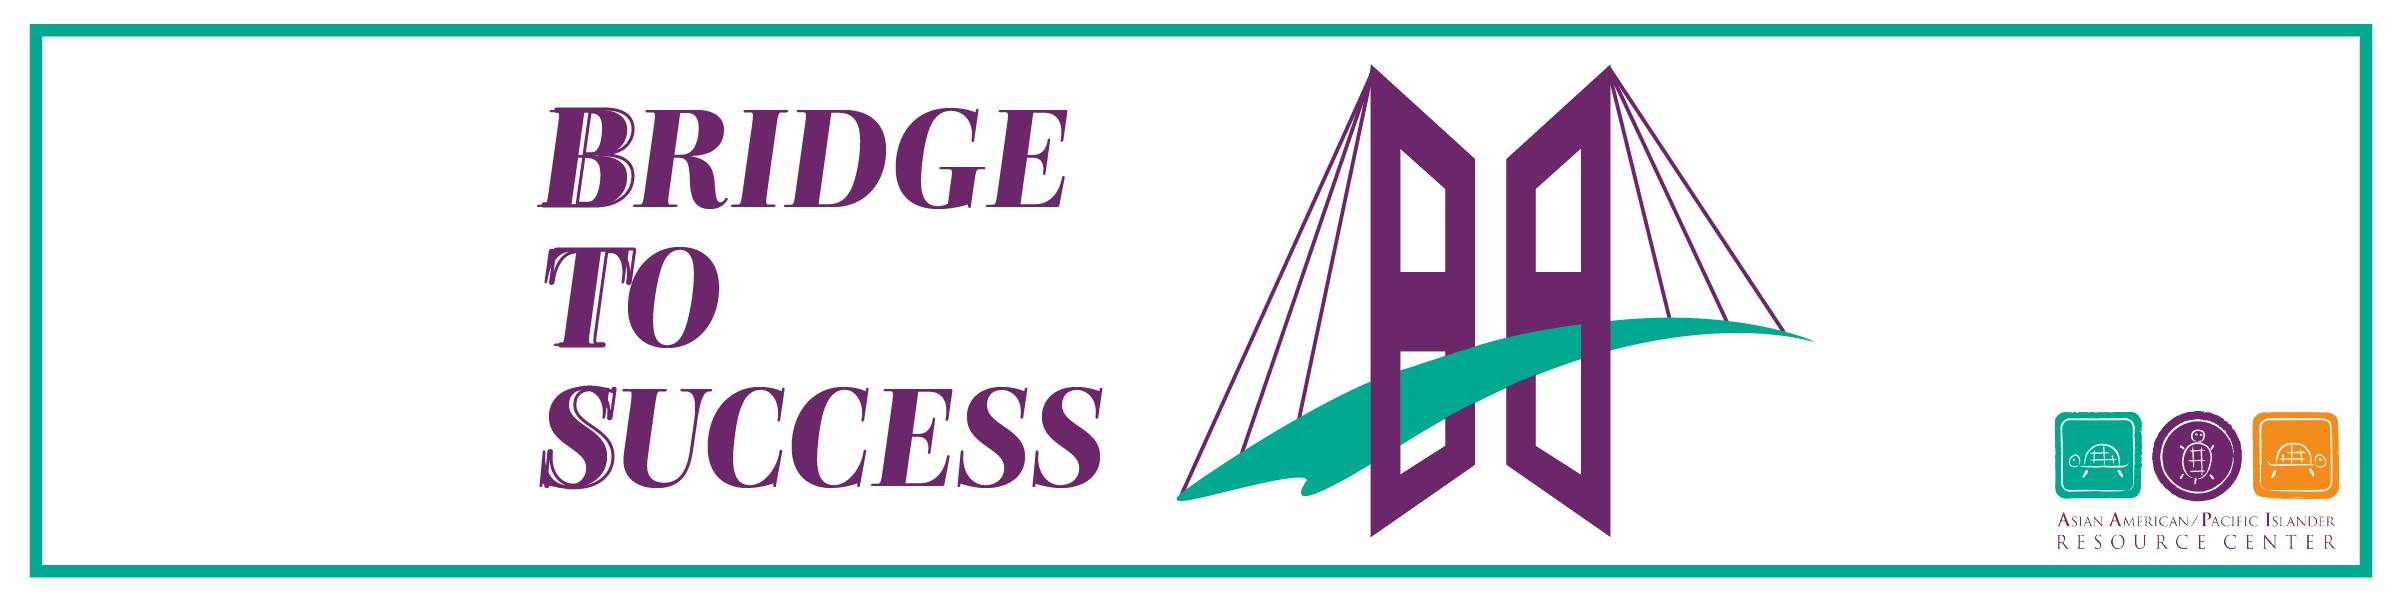 Banner with a bridge logo similar to the golden gate bridge. Bridge to Success in text on the left of the bridge, aa/pirc logo on the right side of the bridge. The colors on the banner are orange, green, and purple on a white background.